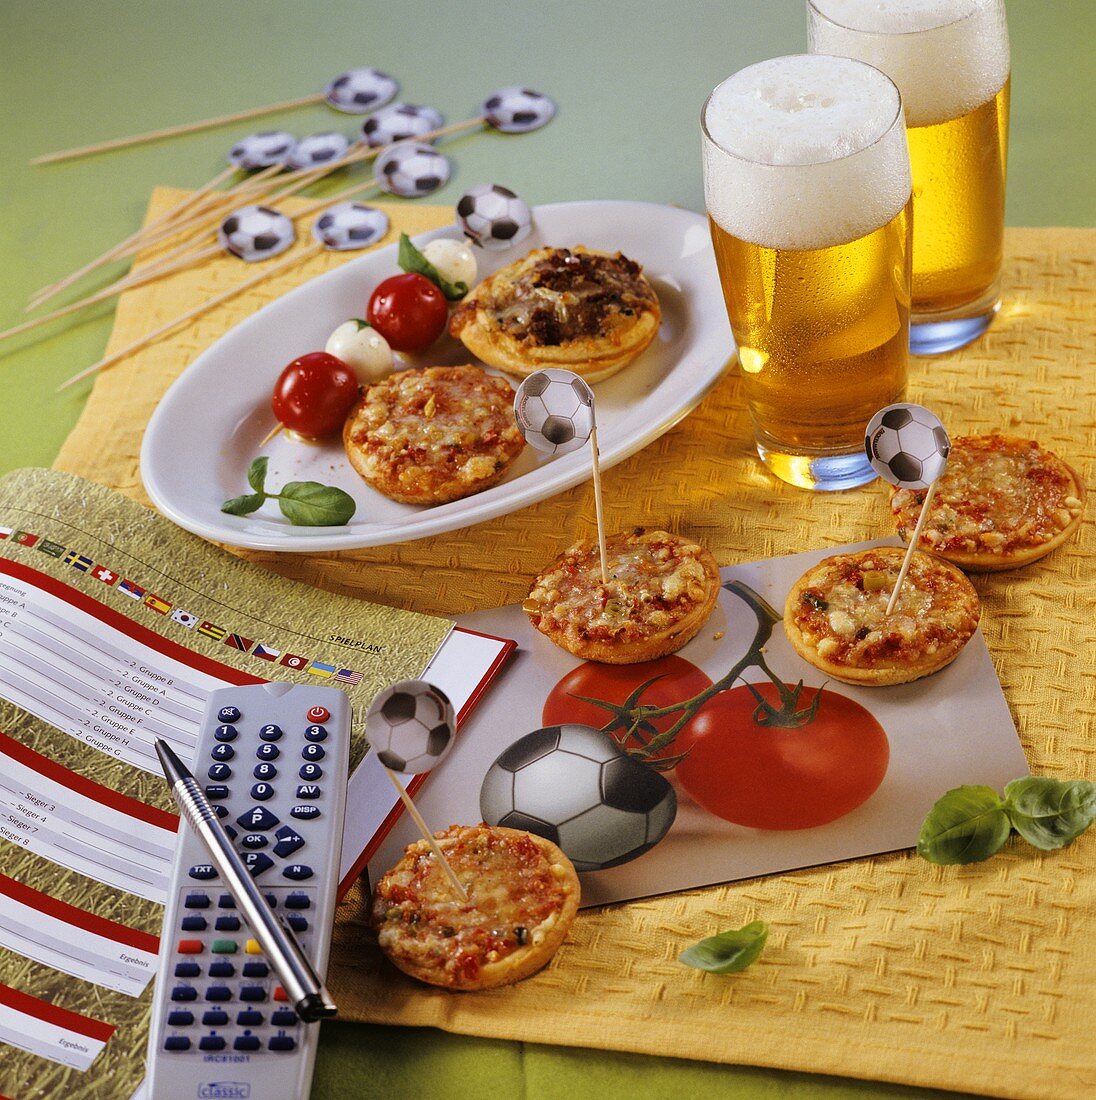 Football themed mini-pizzas, kebabs and remote control